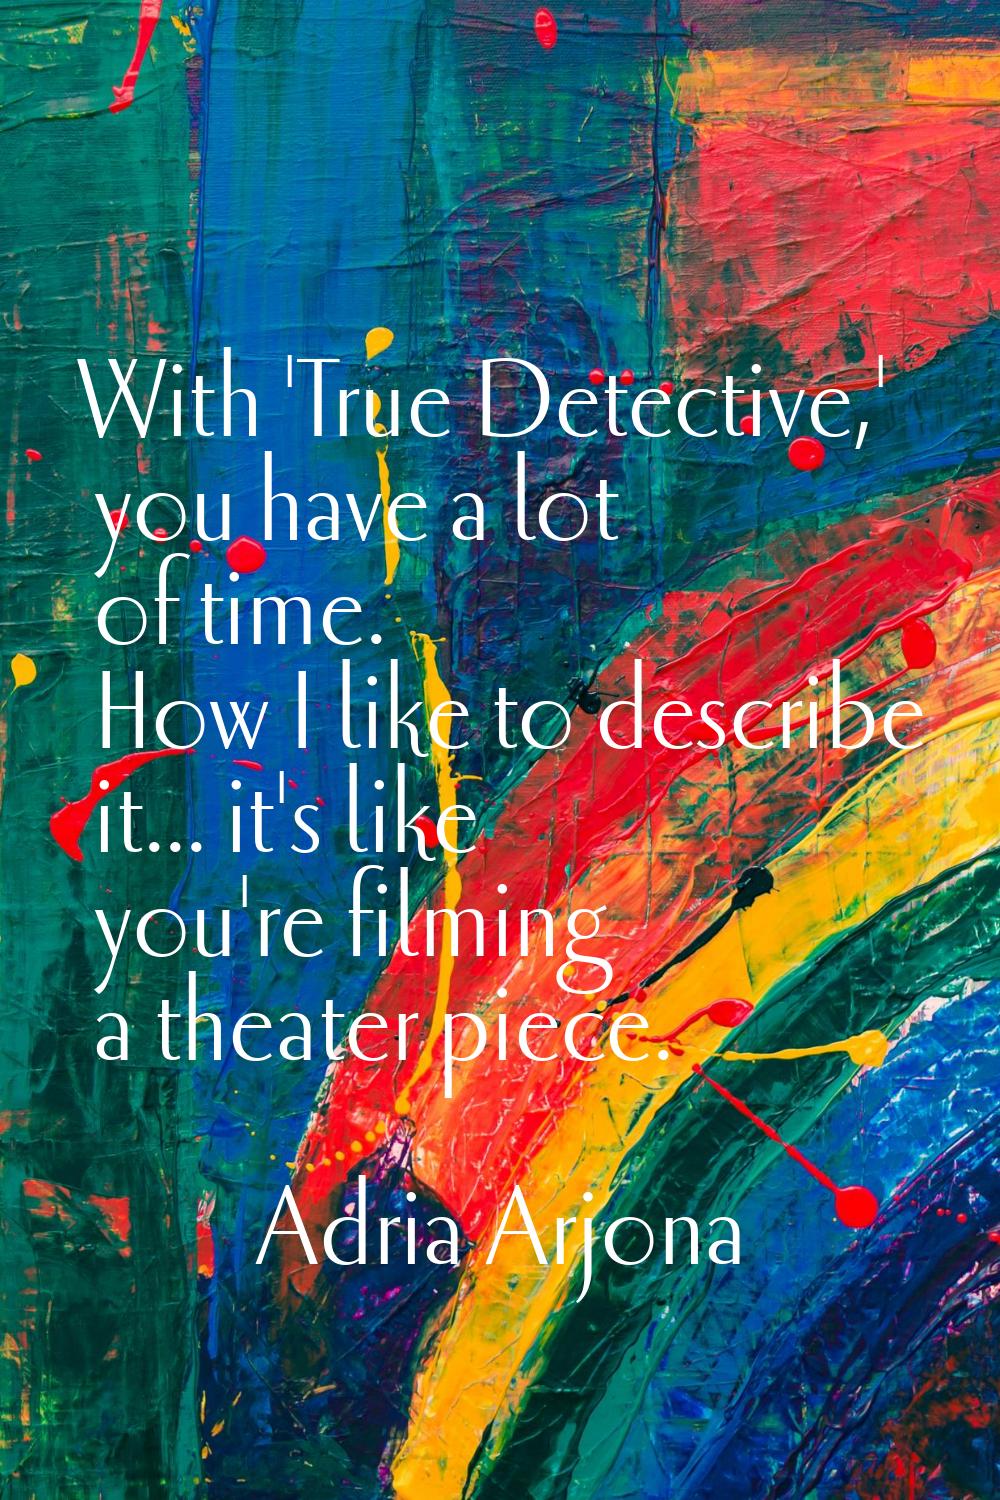 With 'True Detective,' you have a lot of time. How I like to describe it... it's like you're filmin